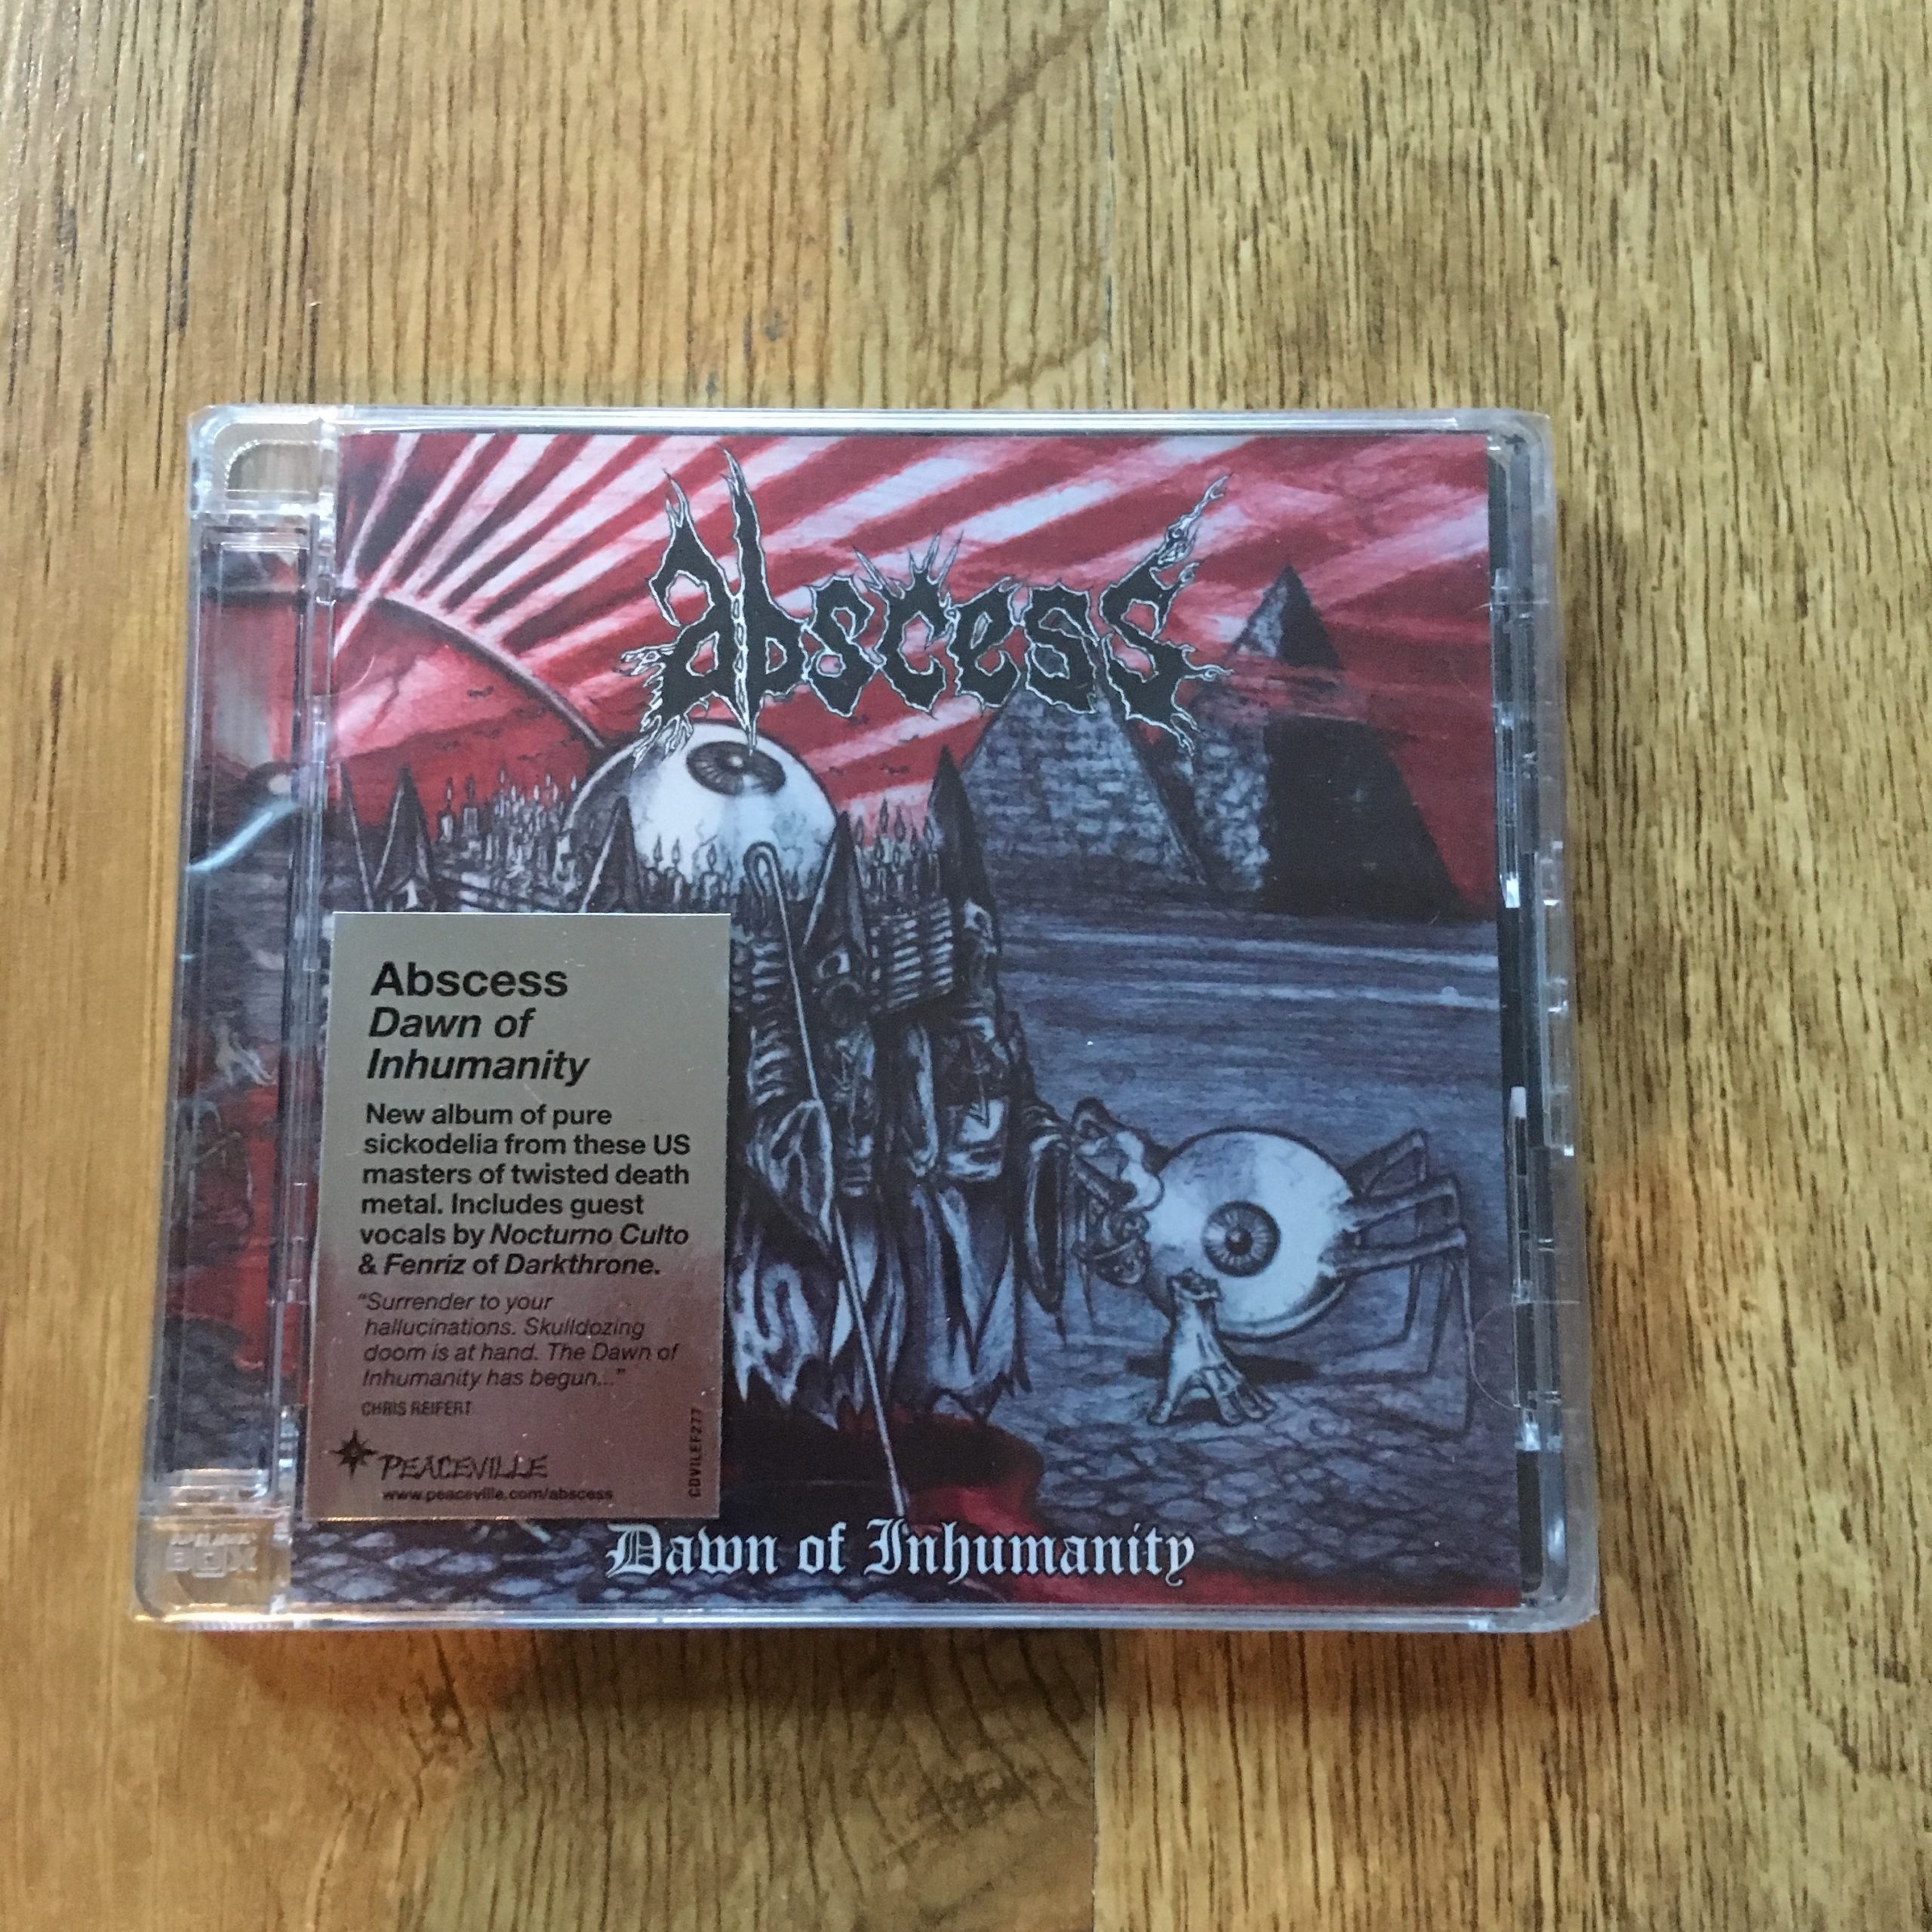 Photo of the Abscess - 'Dawn of Inhumanity' CD